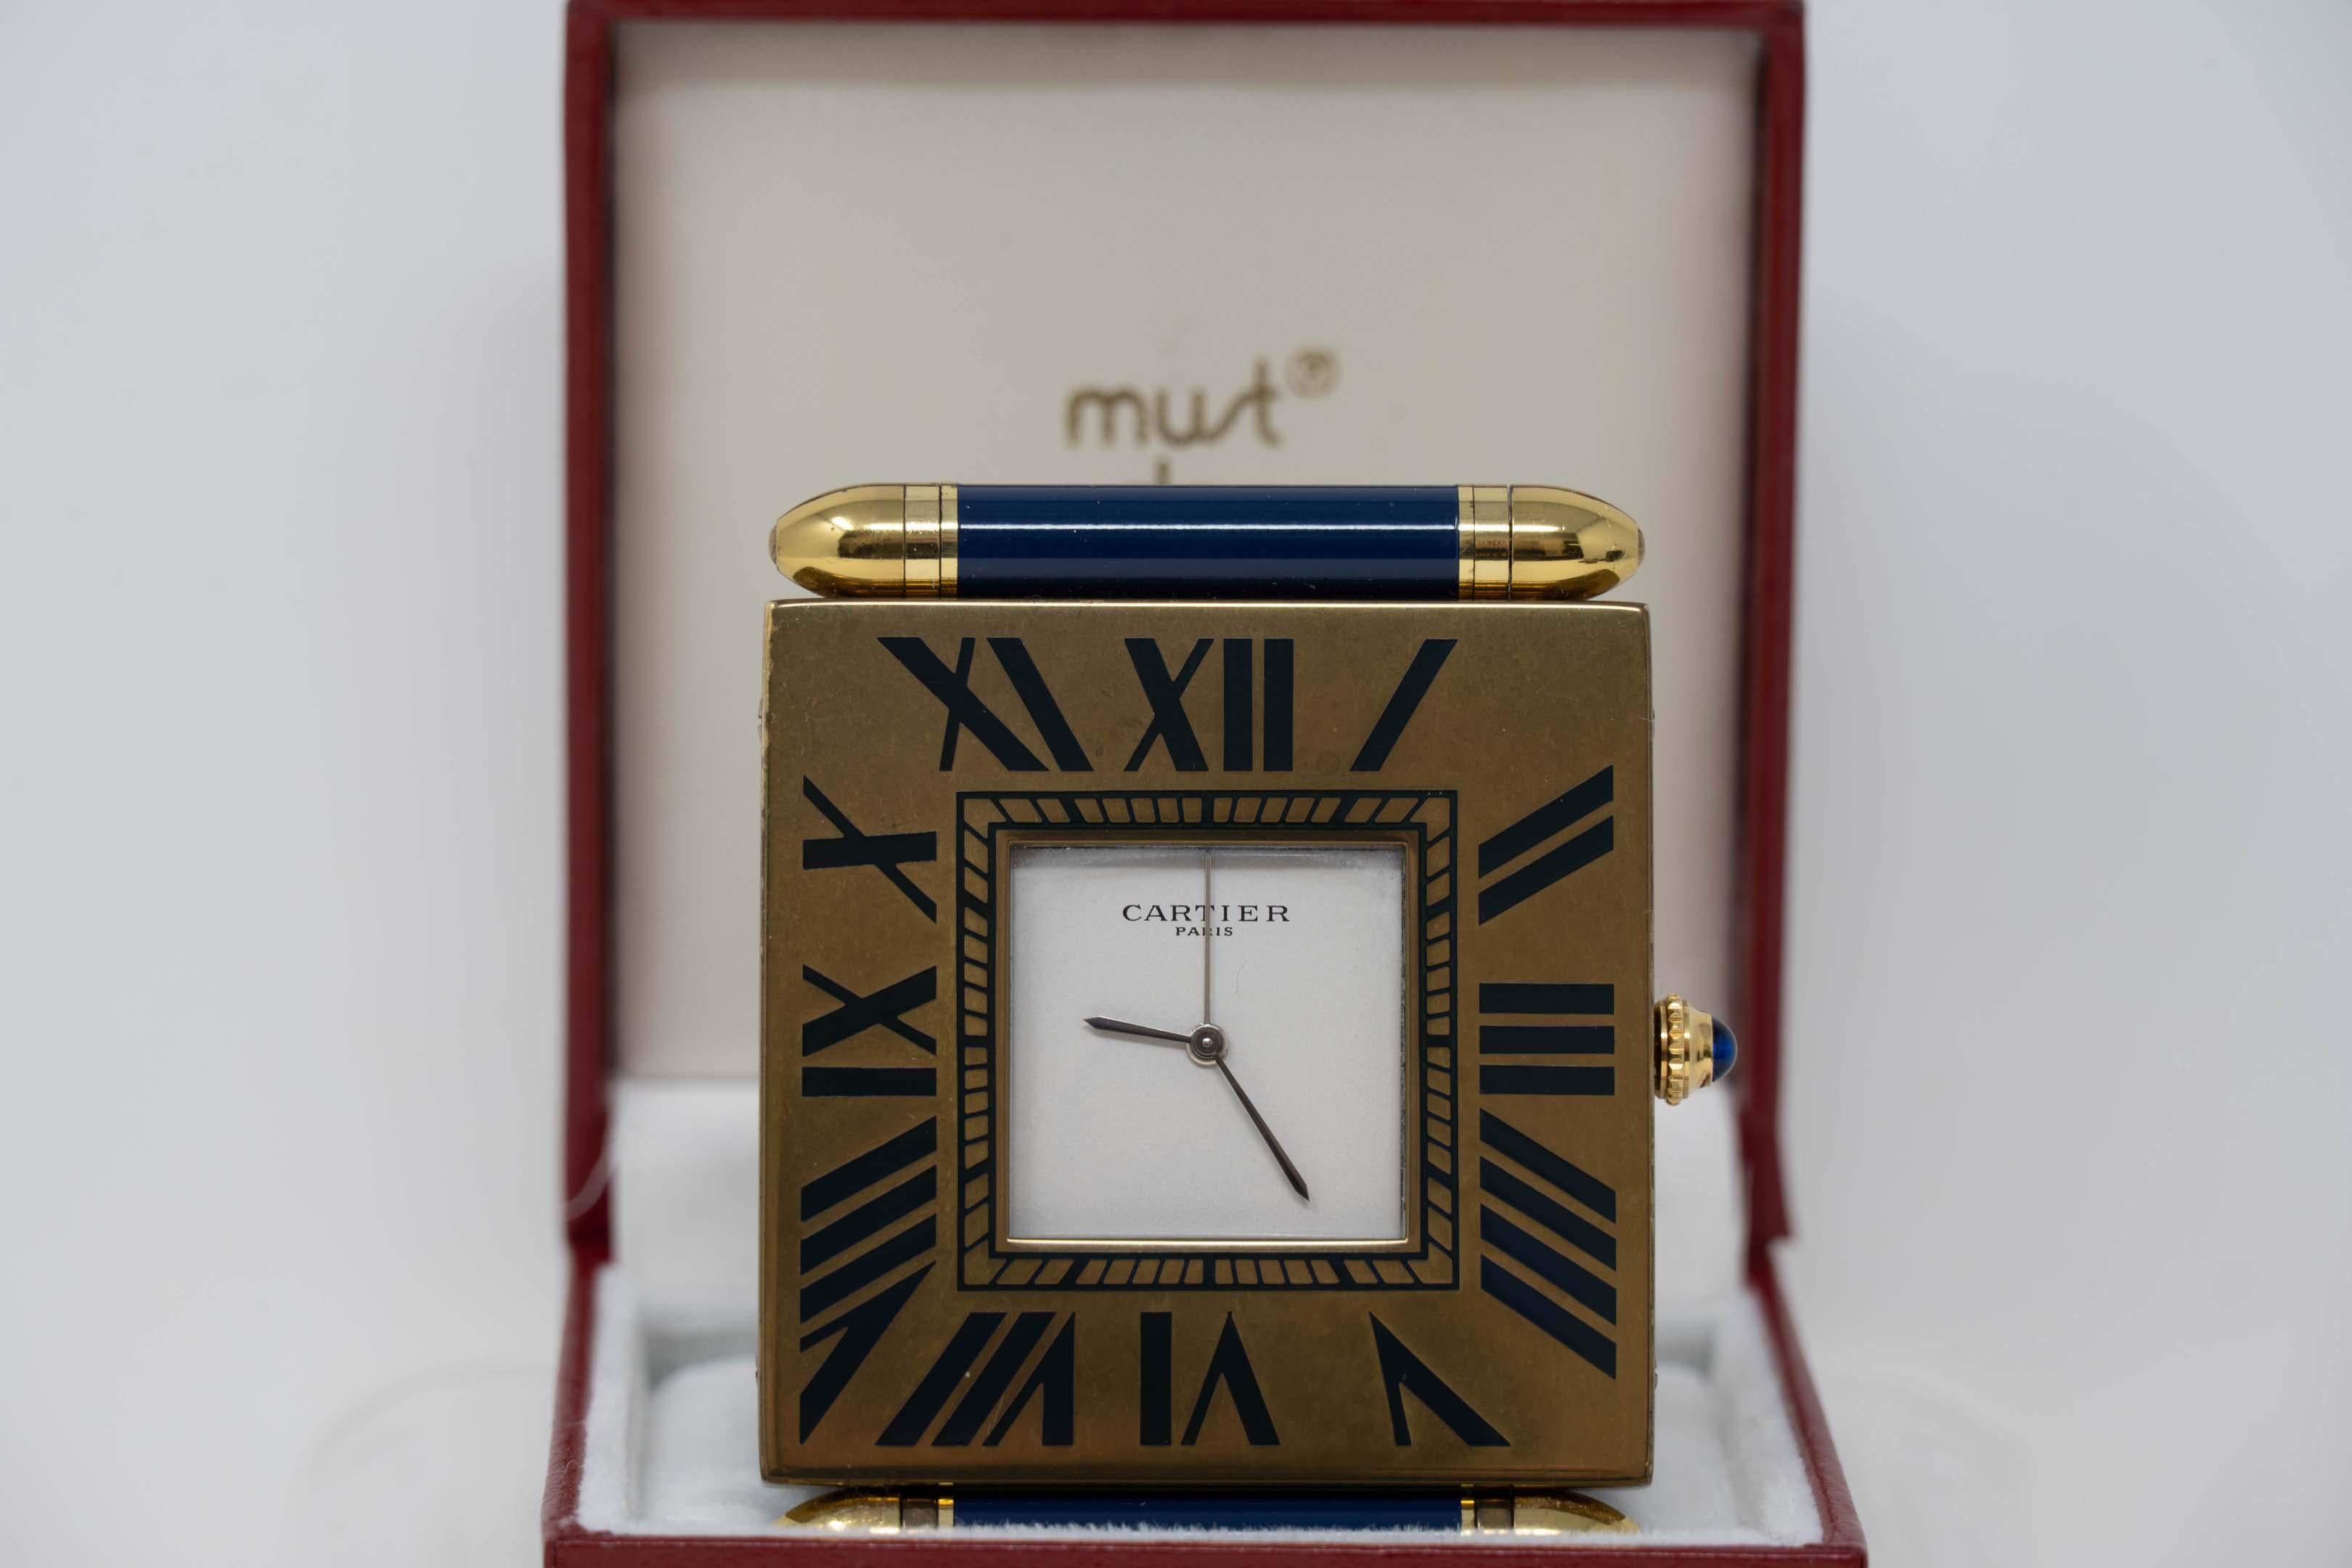 Cartier Paris alarm travel clock. Made in France, gold plated blue enamel outer bezel with box. Measures 2 5/8 inches x 2 inches, in good working order. Quartz movement, base #355109957. In good condition, tarnish base case.
